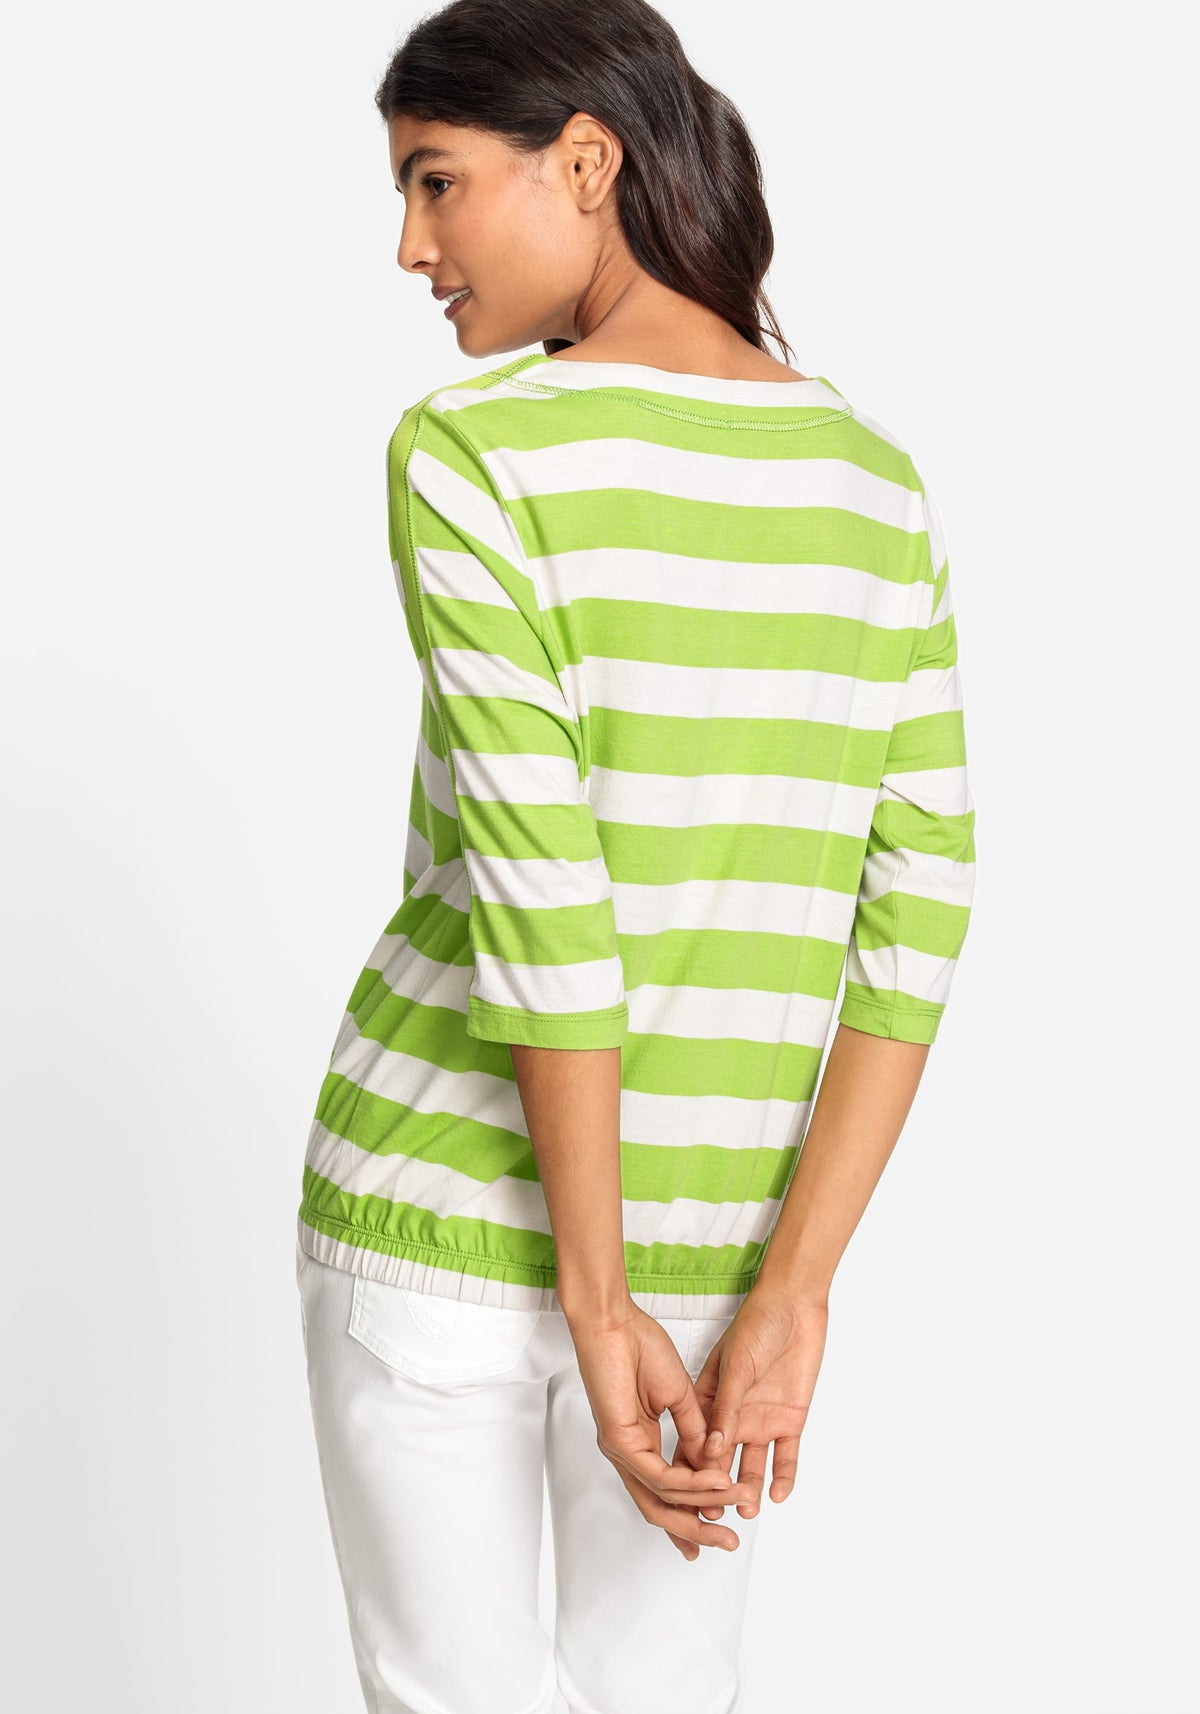 3/4 Sleeve Embellished Placement Print T-Shirt containing TENCEL™ Modal